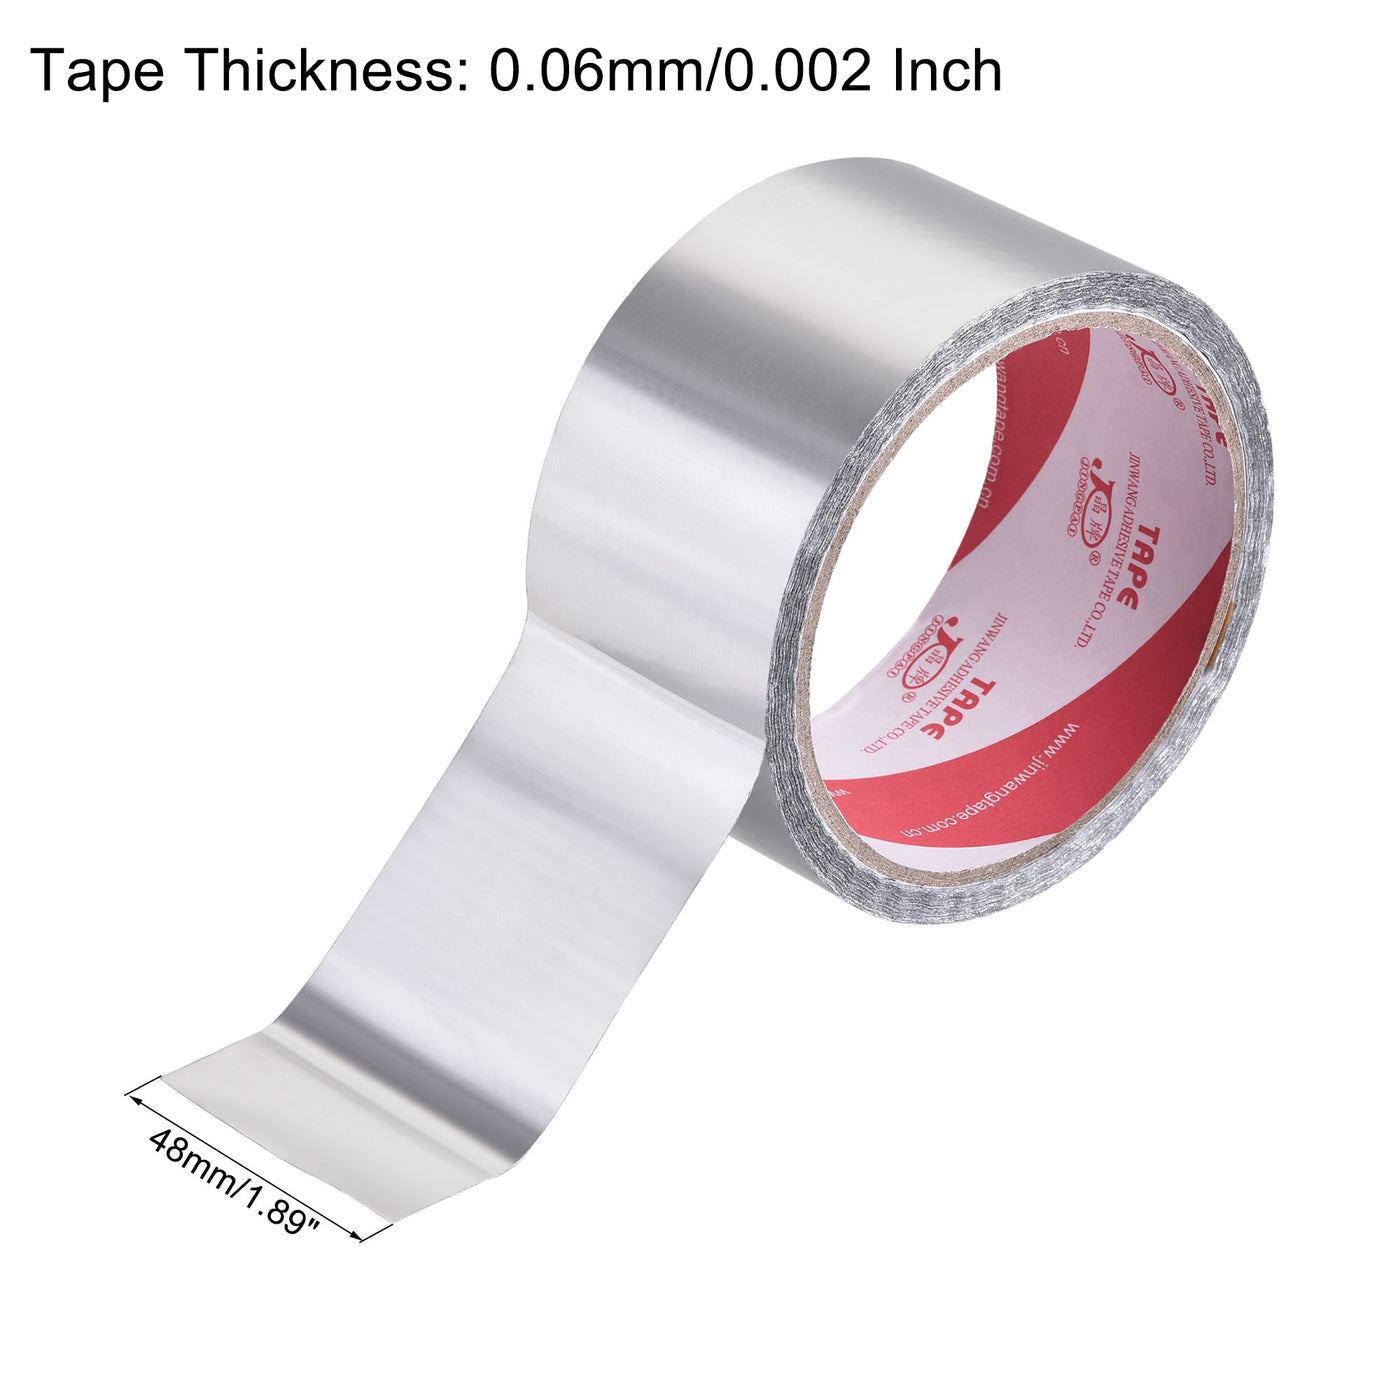 uxcell Uxcell Aluminum Foil Tape, 48mmx32m Self-adhesive Waterproof High Temperature Sealing Tapes for HVAC Duct Pipe Insulation